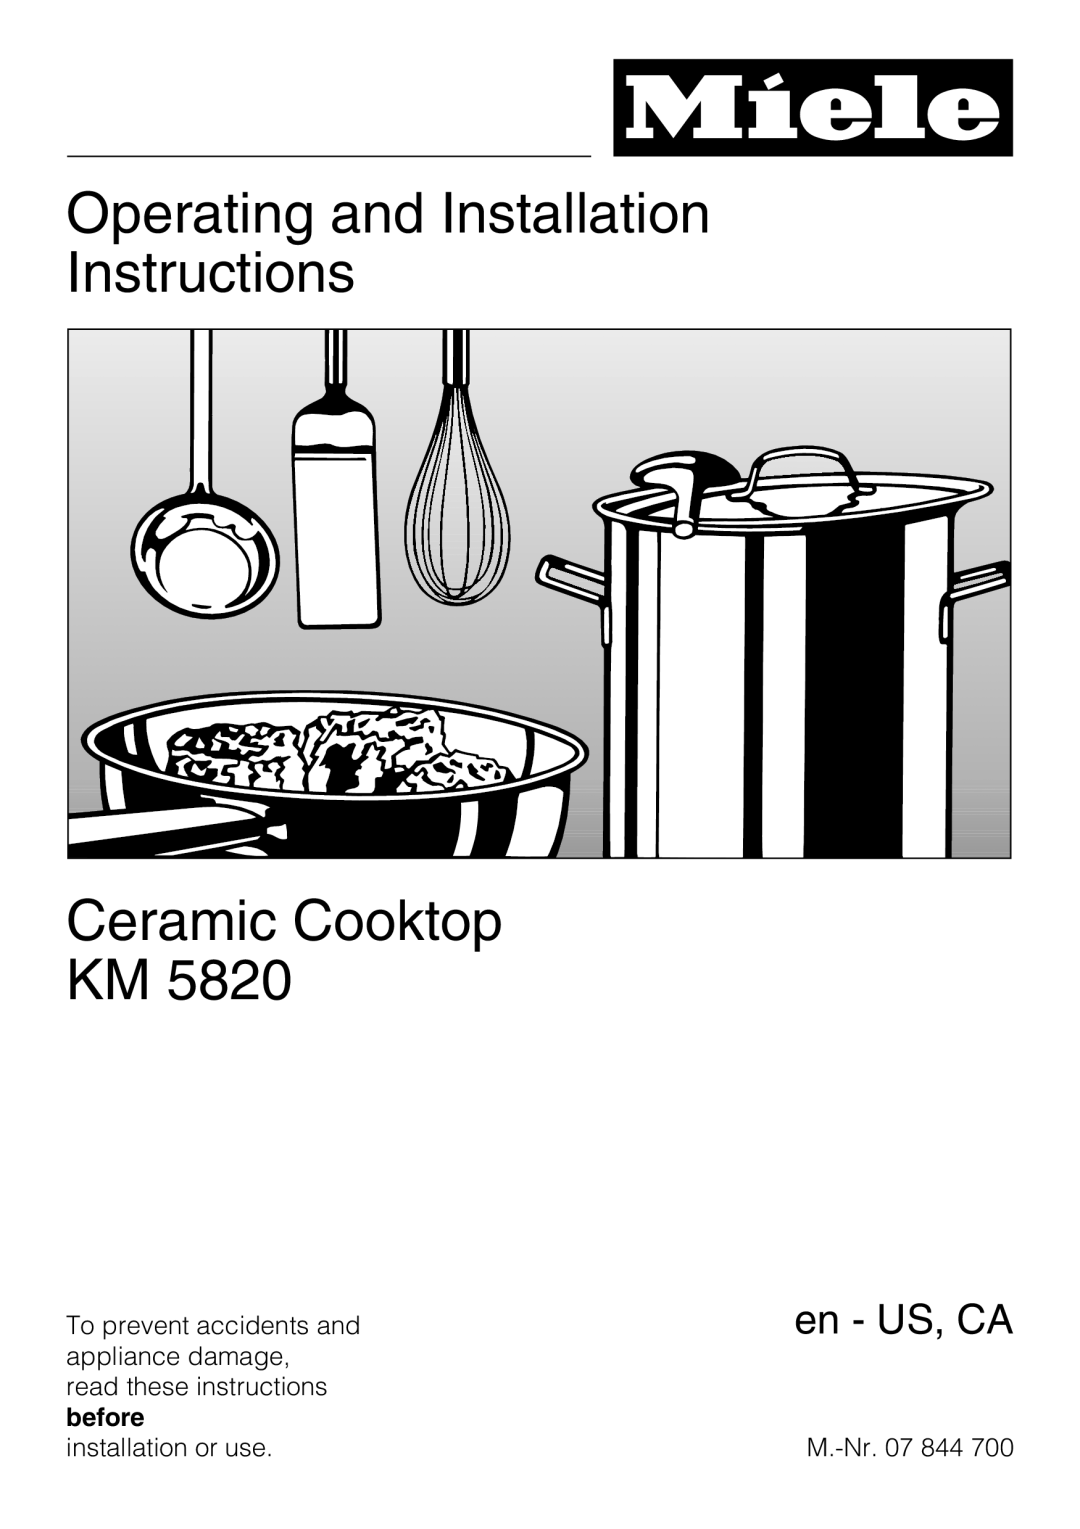 Miele KM 5820 installation instructions Operating and Installation Instructions, Ceramic Cooktop KM, en - US, CA 